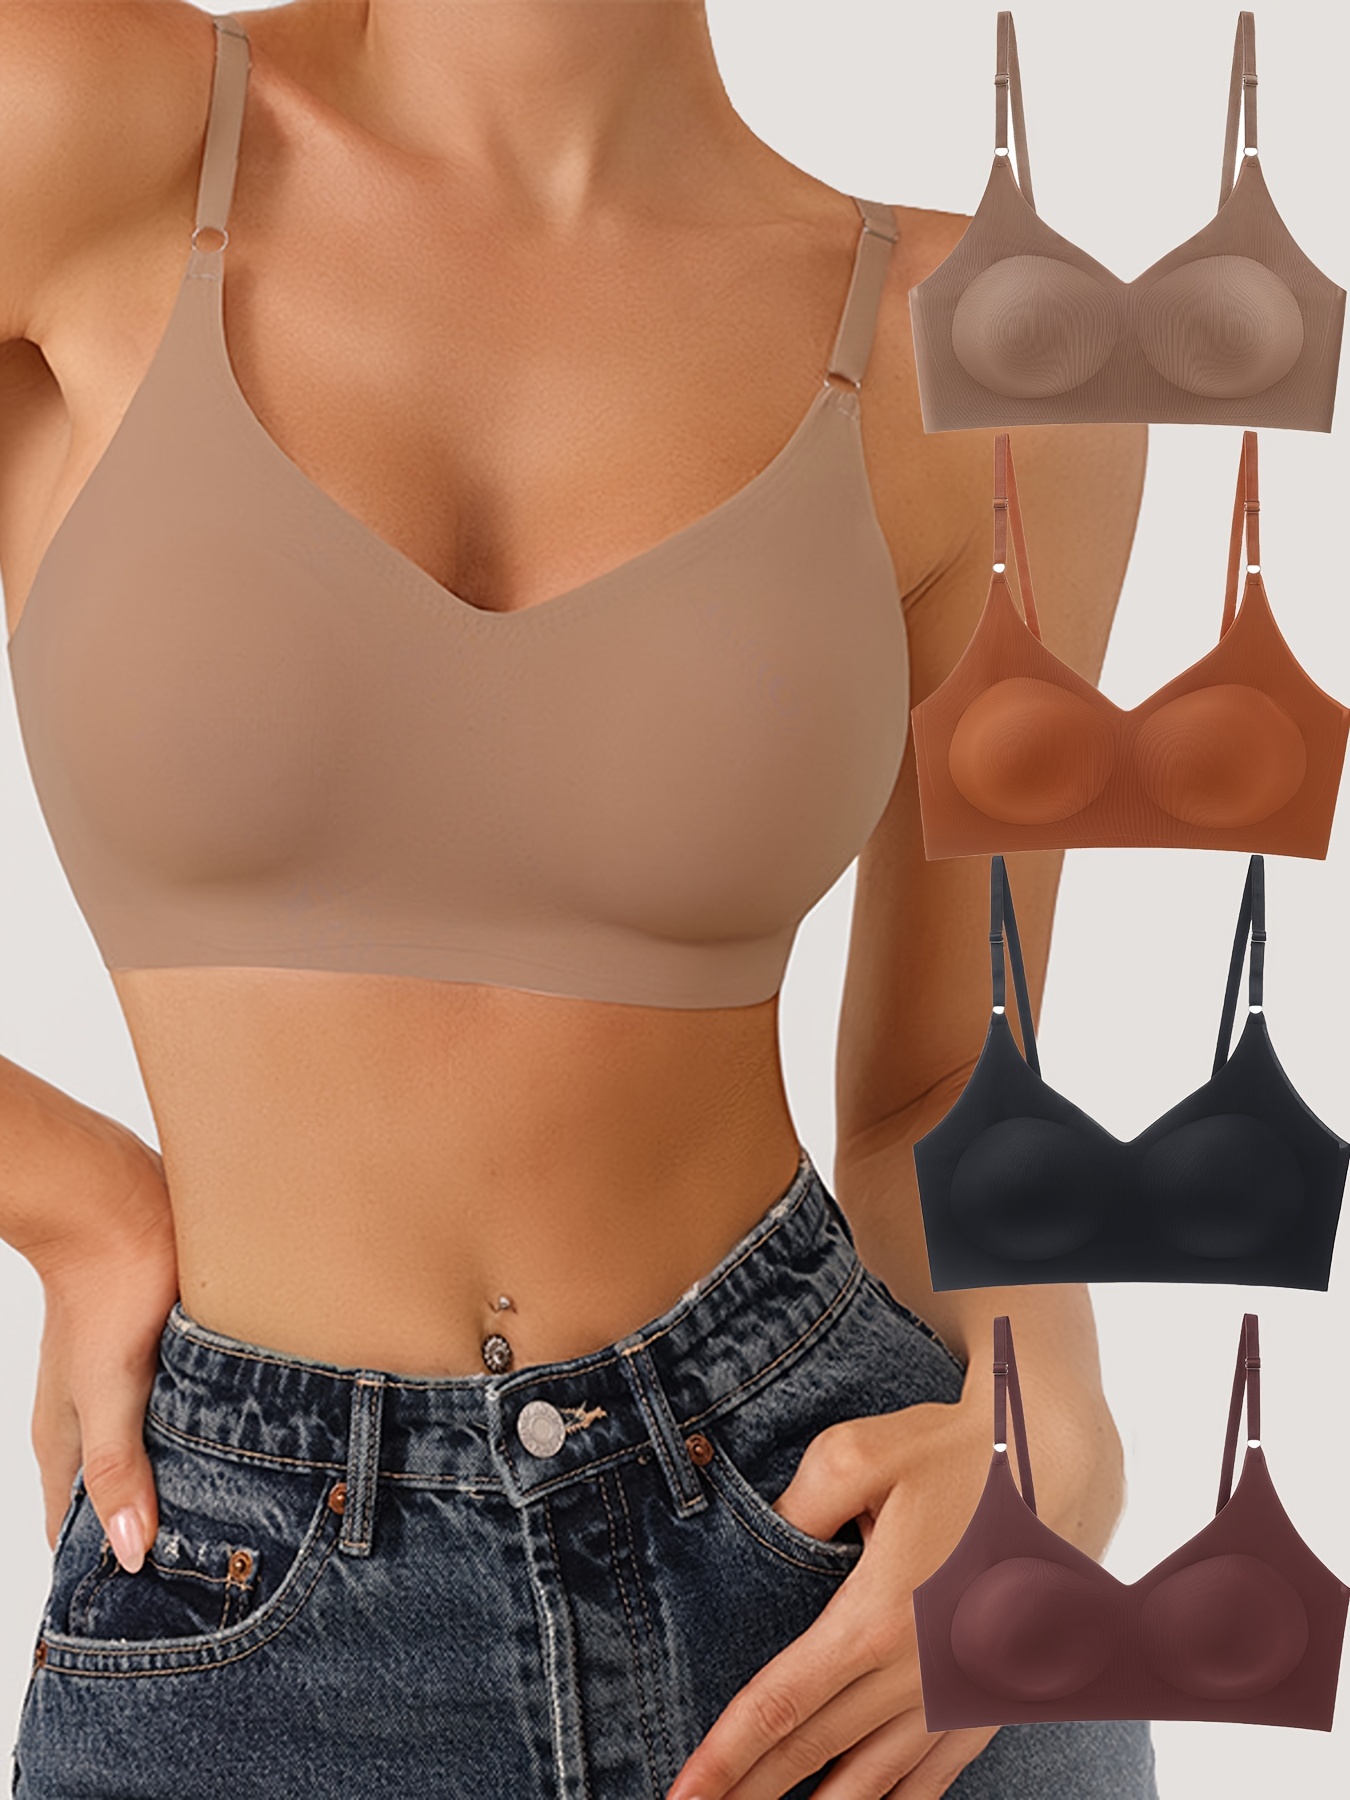 Genie Bra, Women's Dream, Bra Seamless, Bust Support w/, Convertible  Straps Choice of Color/Size